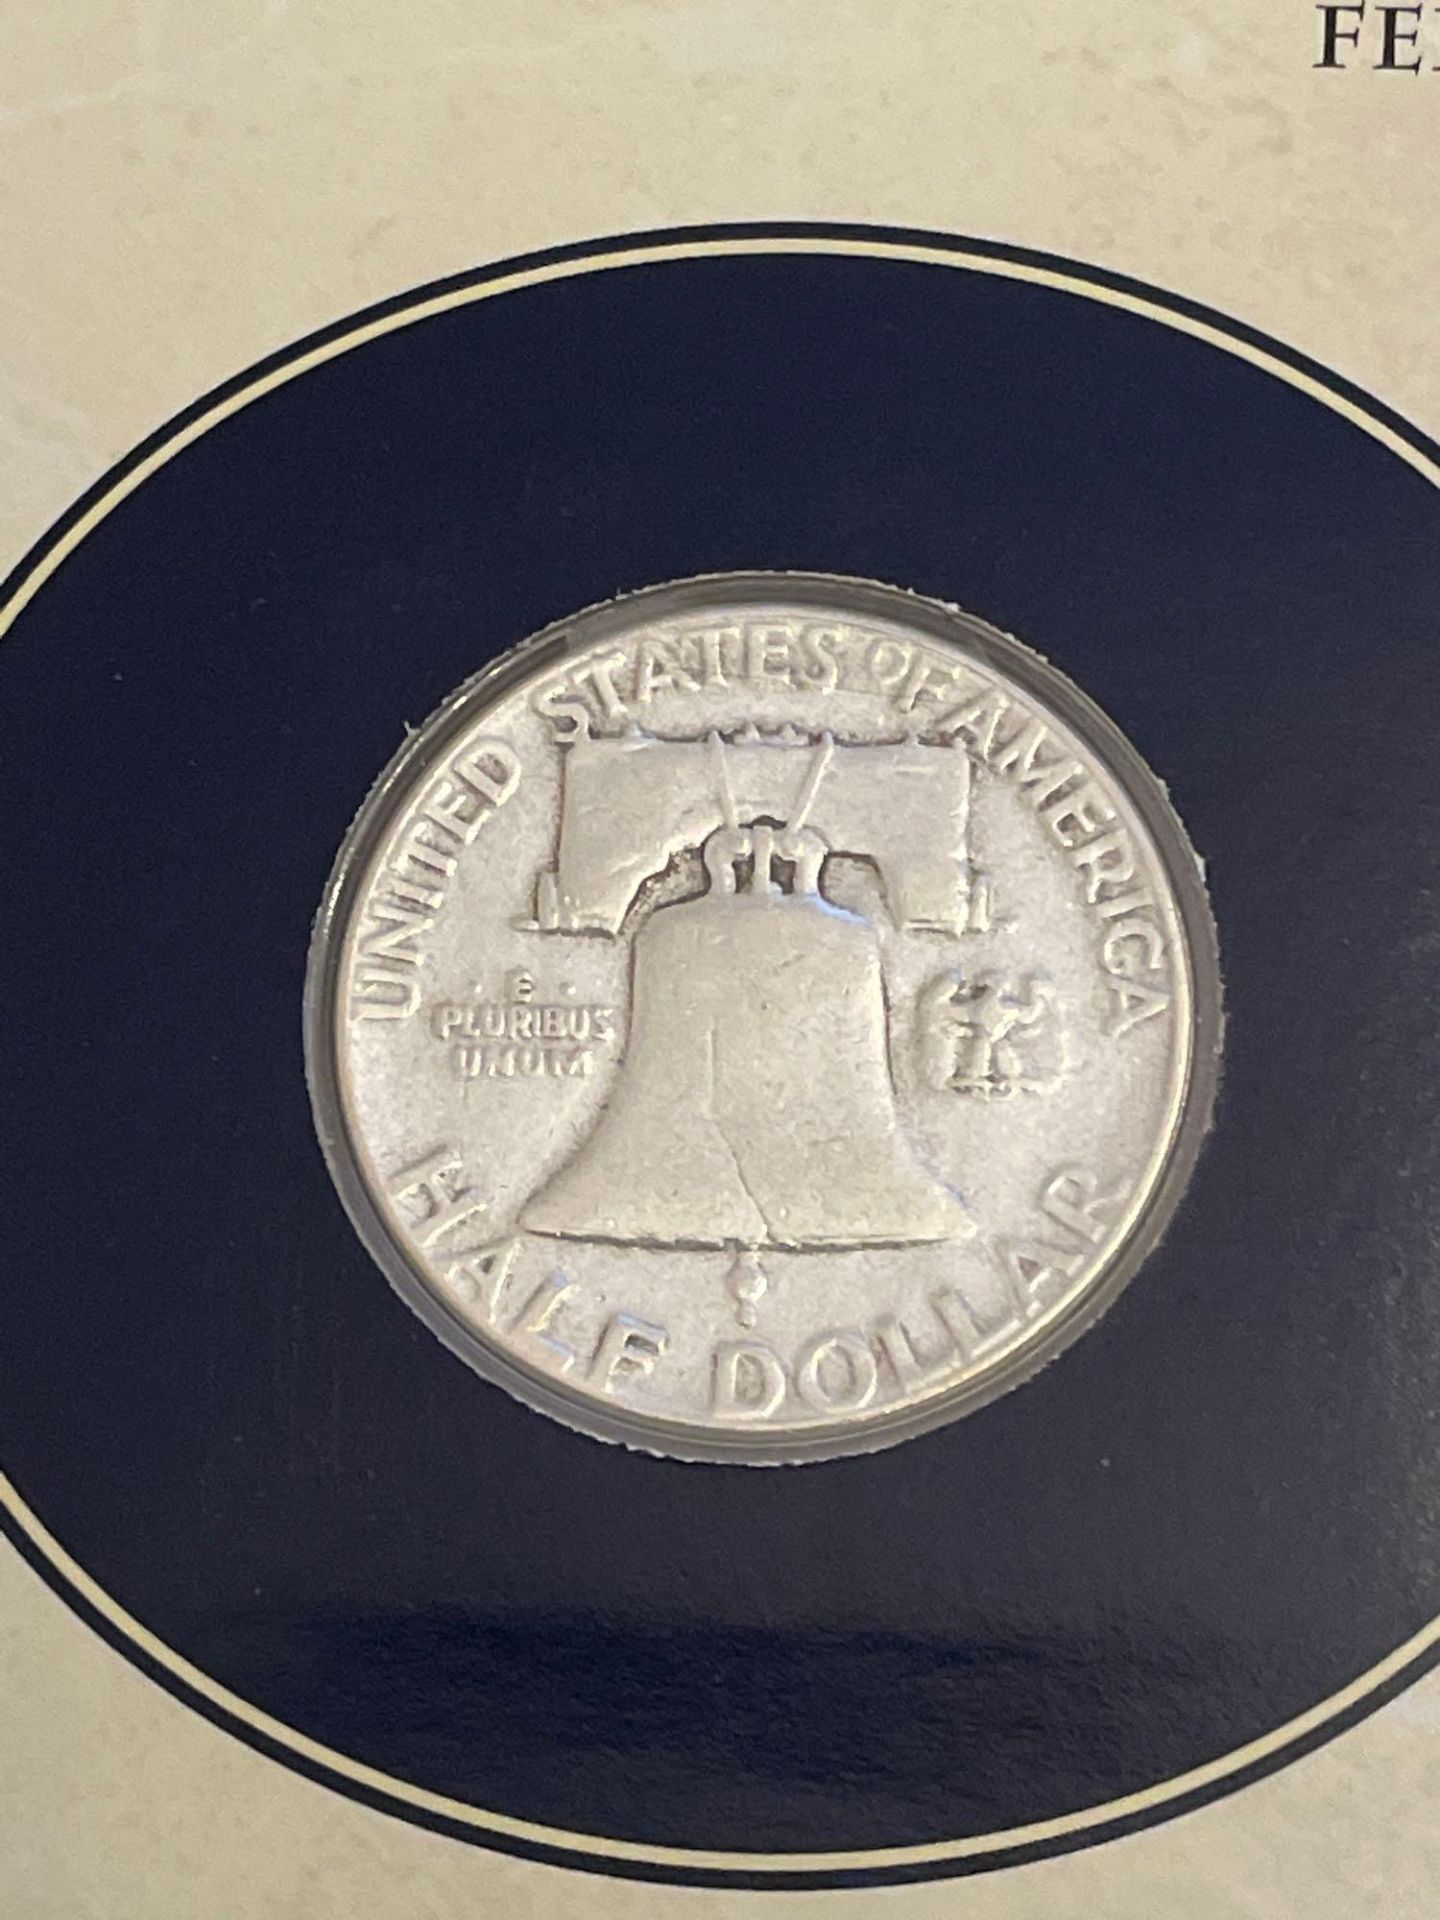 1951 Franklin Silver Half-Dollar with U.S. French Alliance Stamp - Image 5 of 5